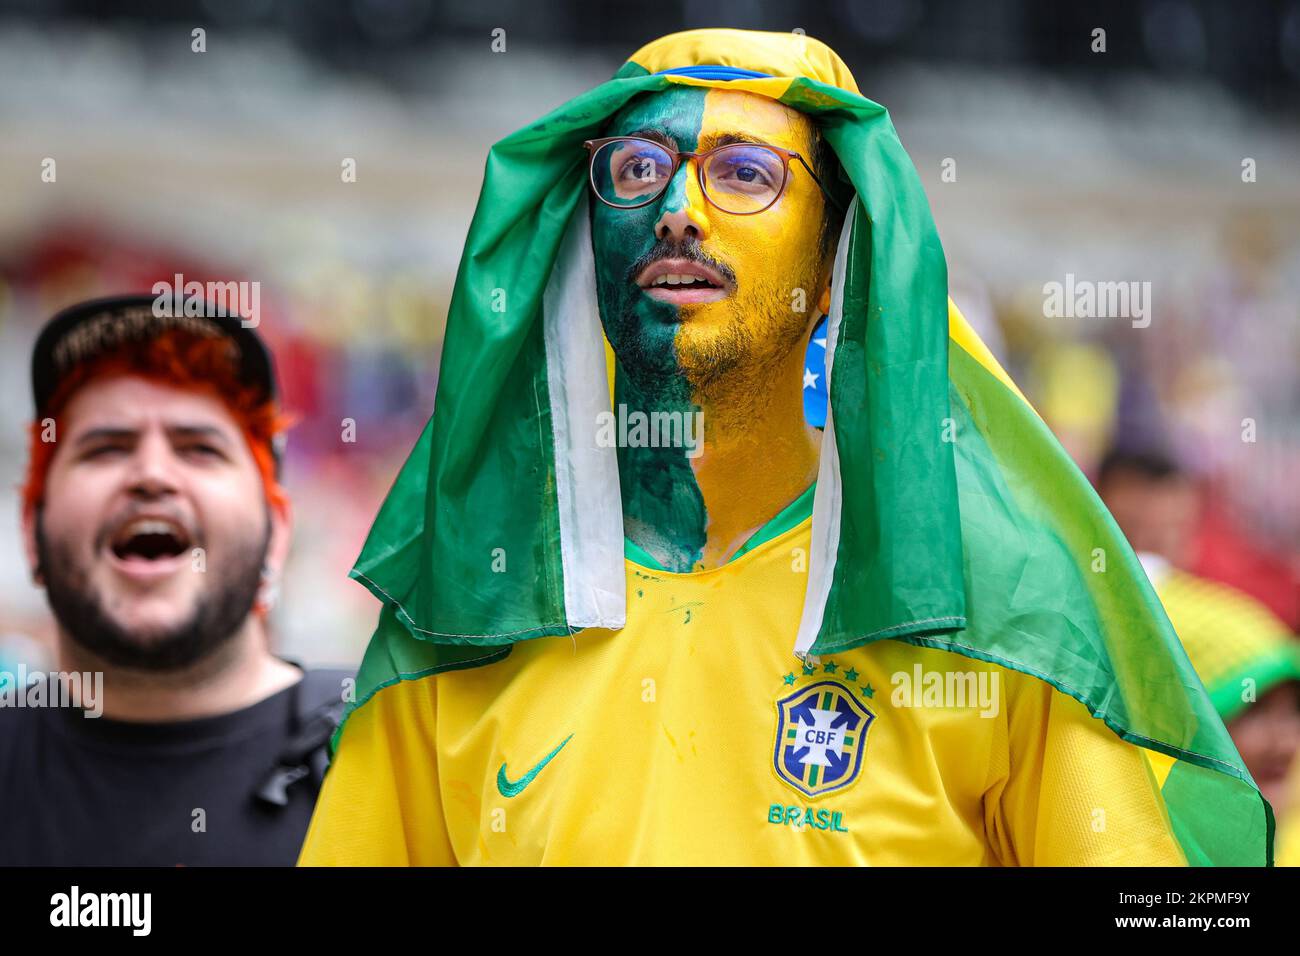 MG - Belo Horizonte - 11/28/2022 - 2022 WORLD CUP, FANS BELO HORIZONTE - Fans watch the match between Brazil X Switzerland at Mineirao Stadium in the city of Belo Horizonte during the World Cup in Qatar. Photo: Gilson Junio/AGIF/Sipa USA Stock Photo